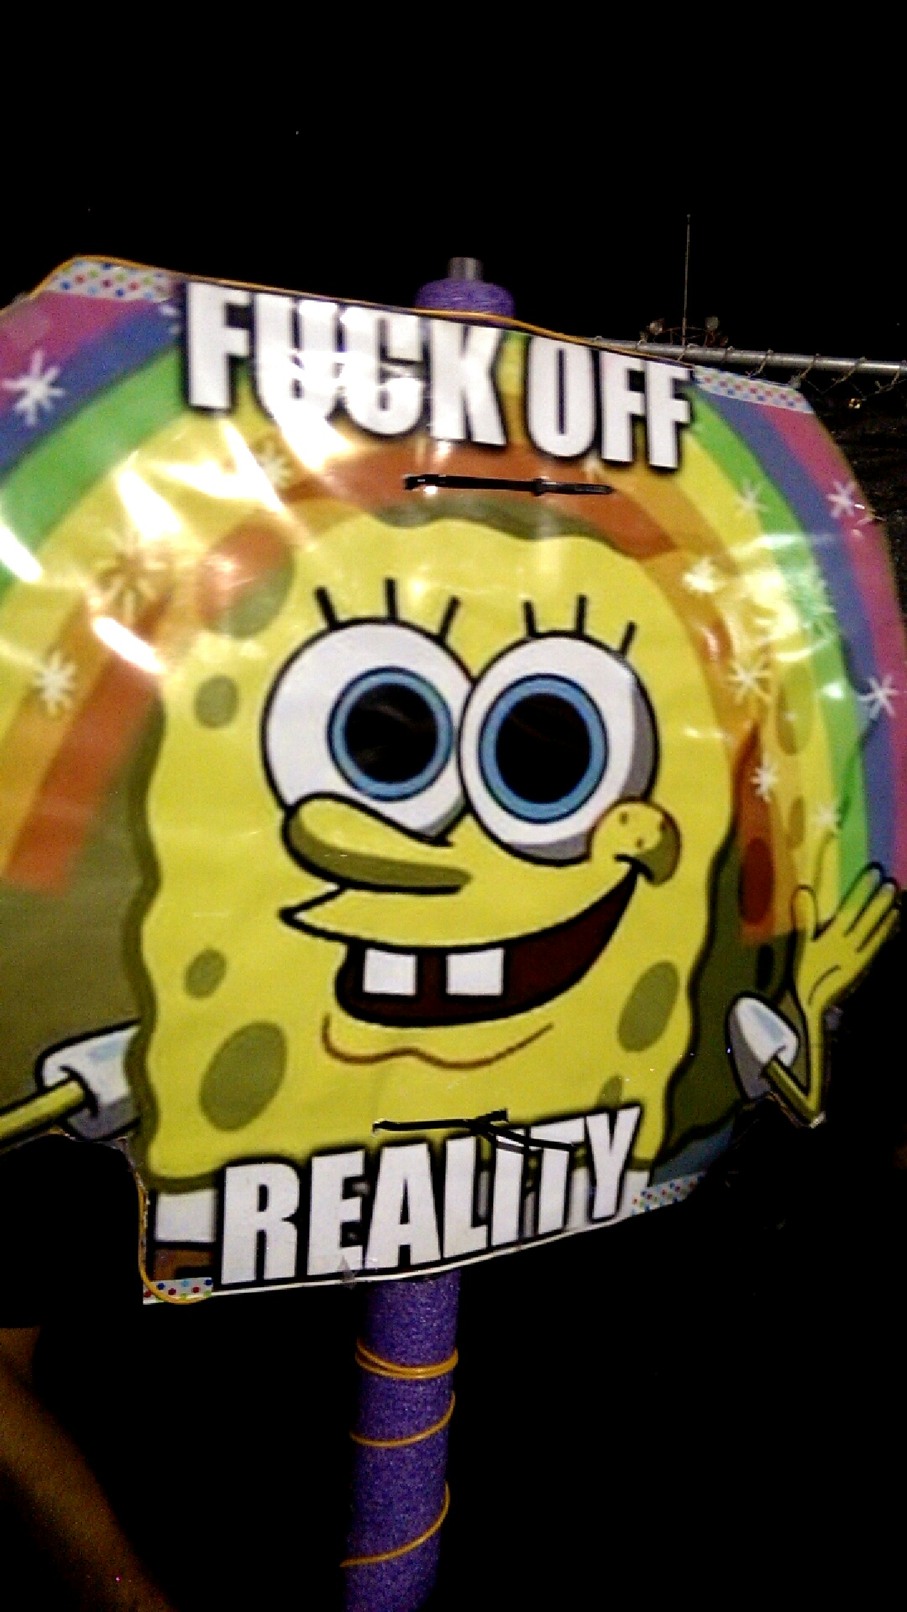 Found a meme within a rave